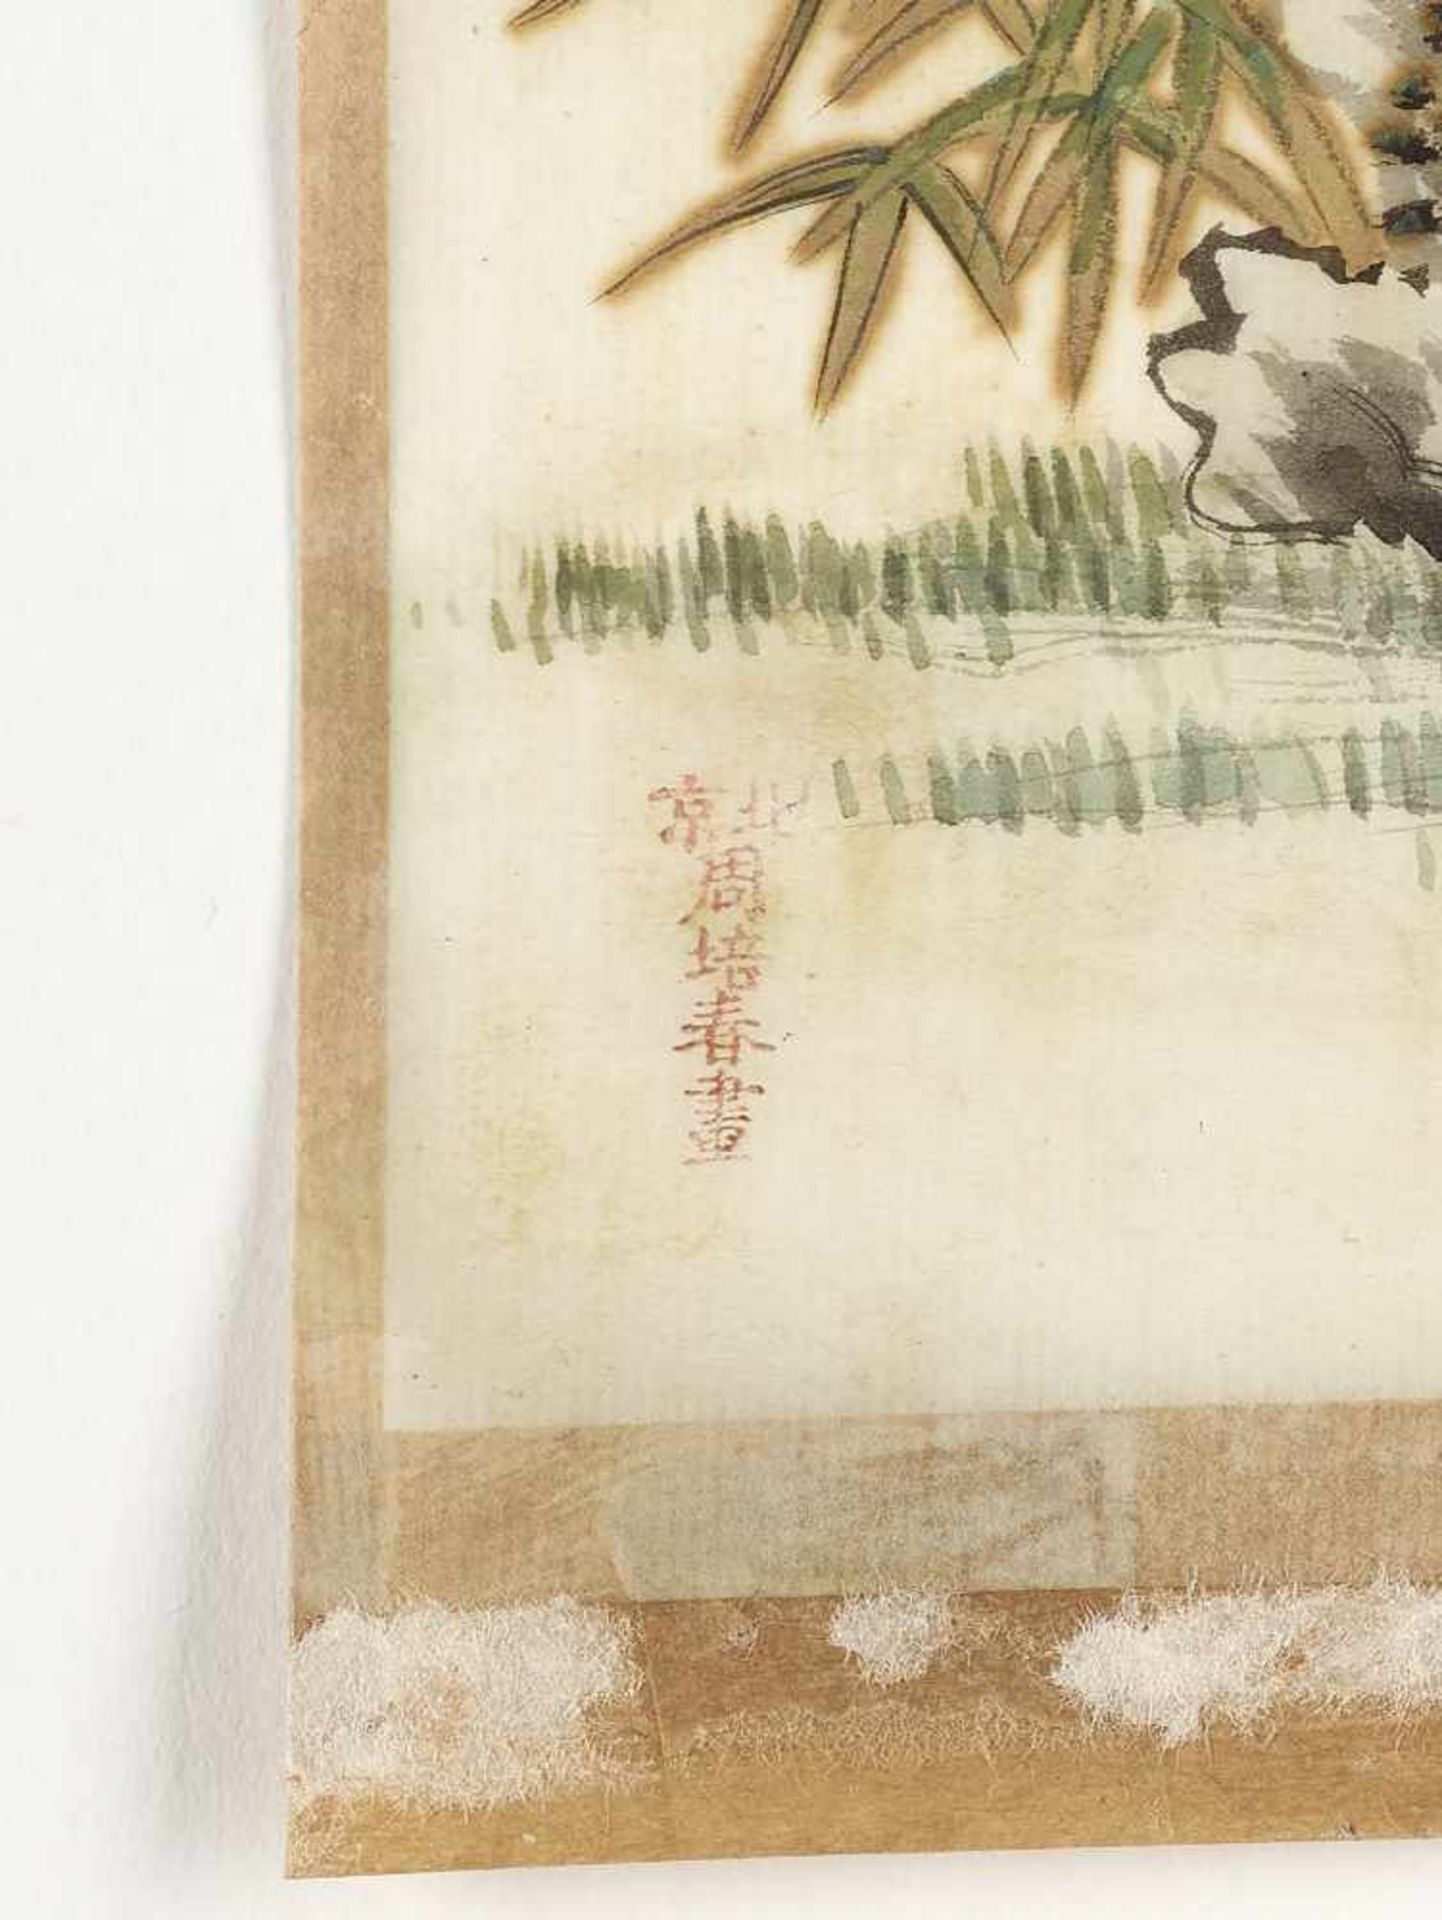 ZHOU PEICHUN (ACTIVE 1880-1910)China. Black ink and Watercolors on paper. Depiction of - Image 2 of 4